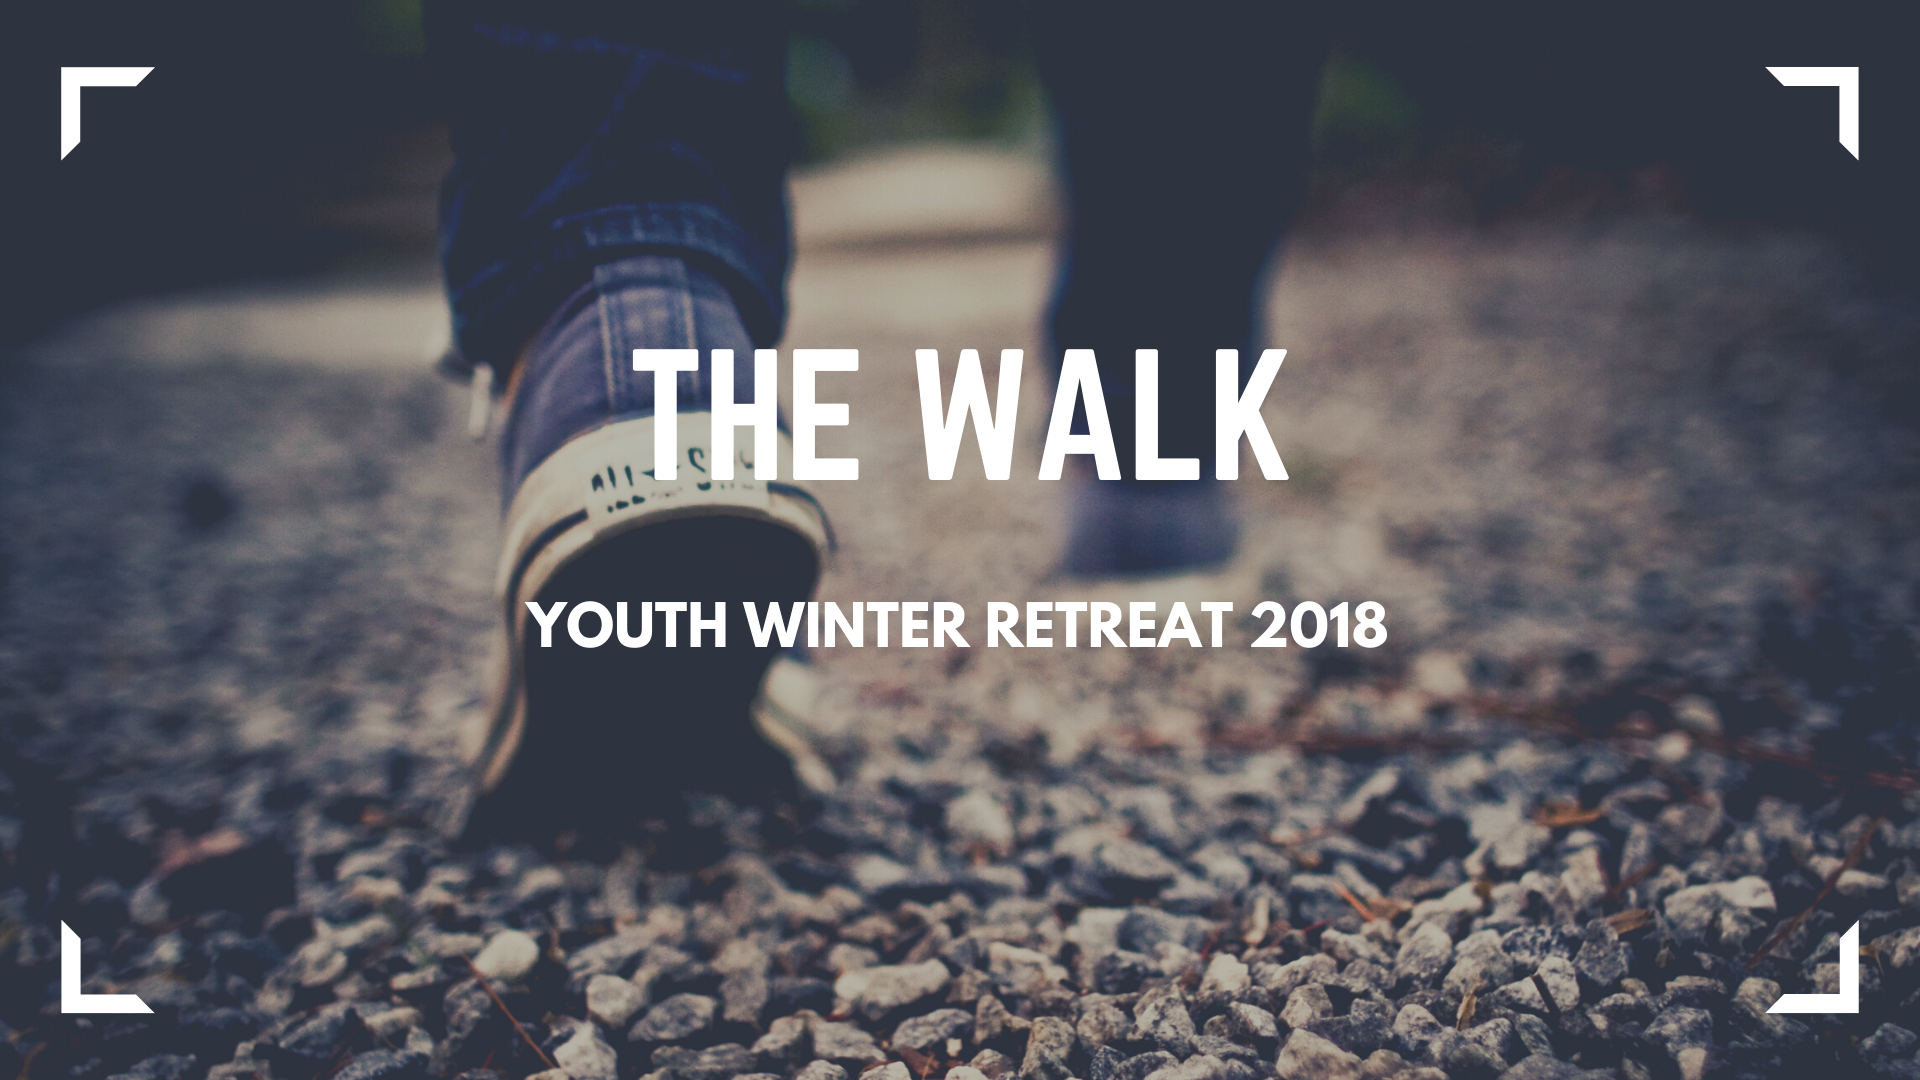 The Walk: Youth Winter Retreat 2018 banner